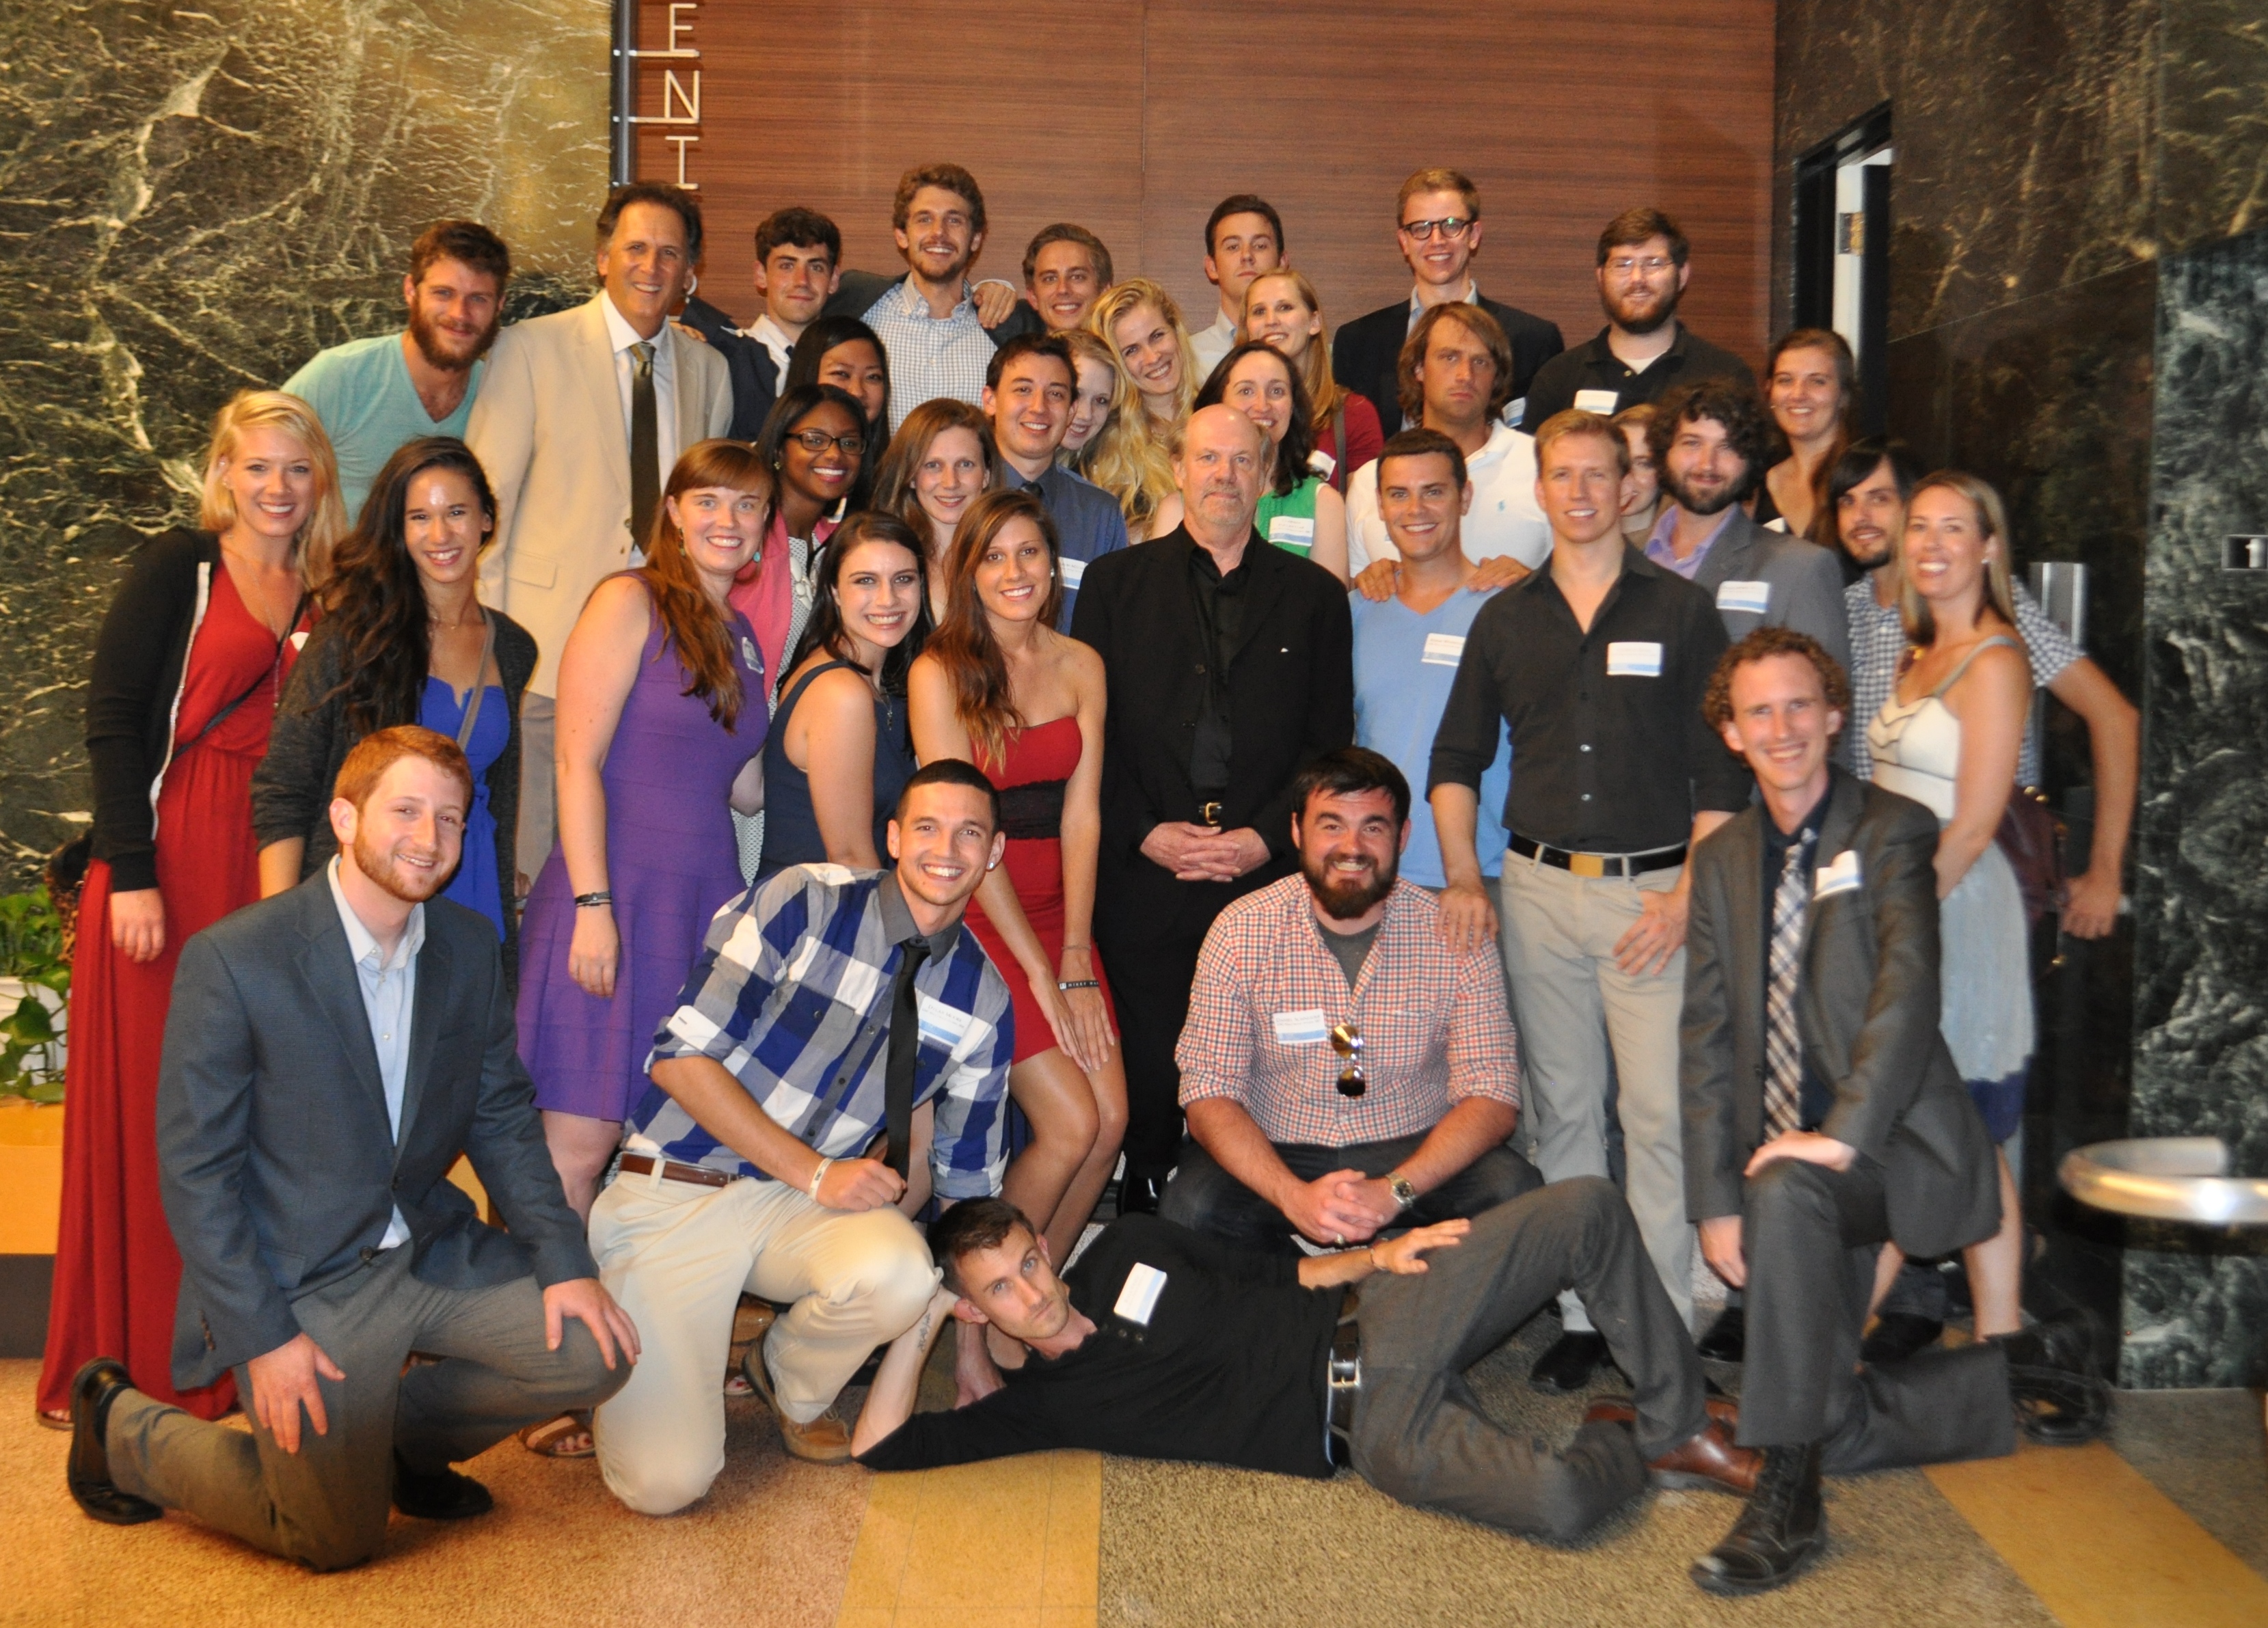 Interns through the years at the 2014 reception. (photo courtesy of Suzanne Weerts)